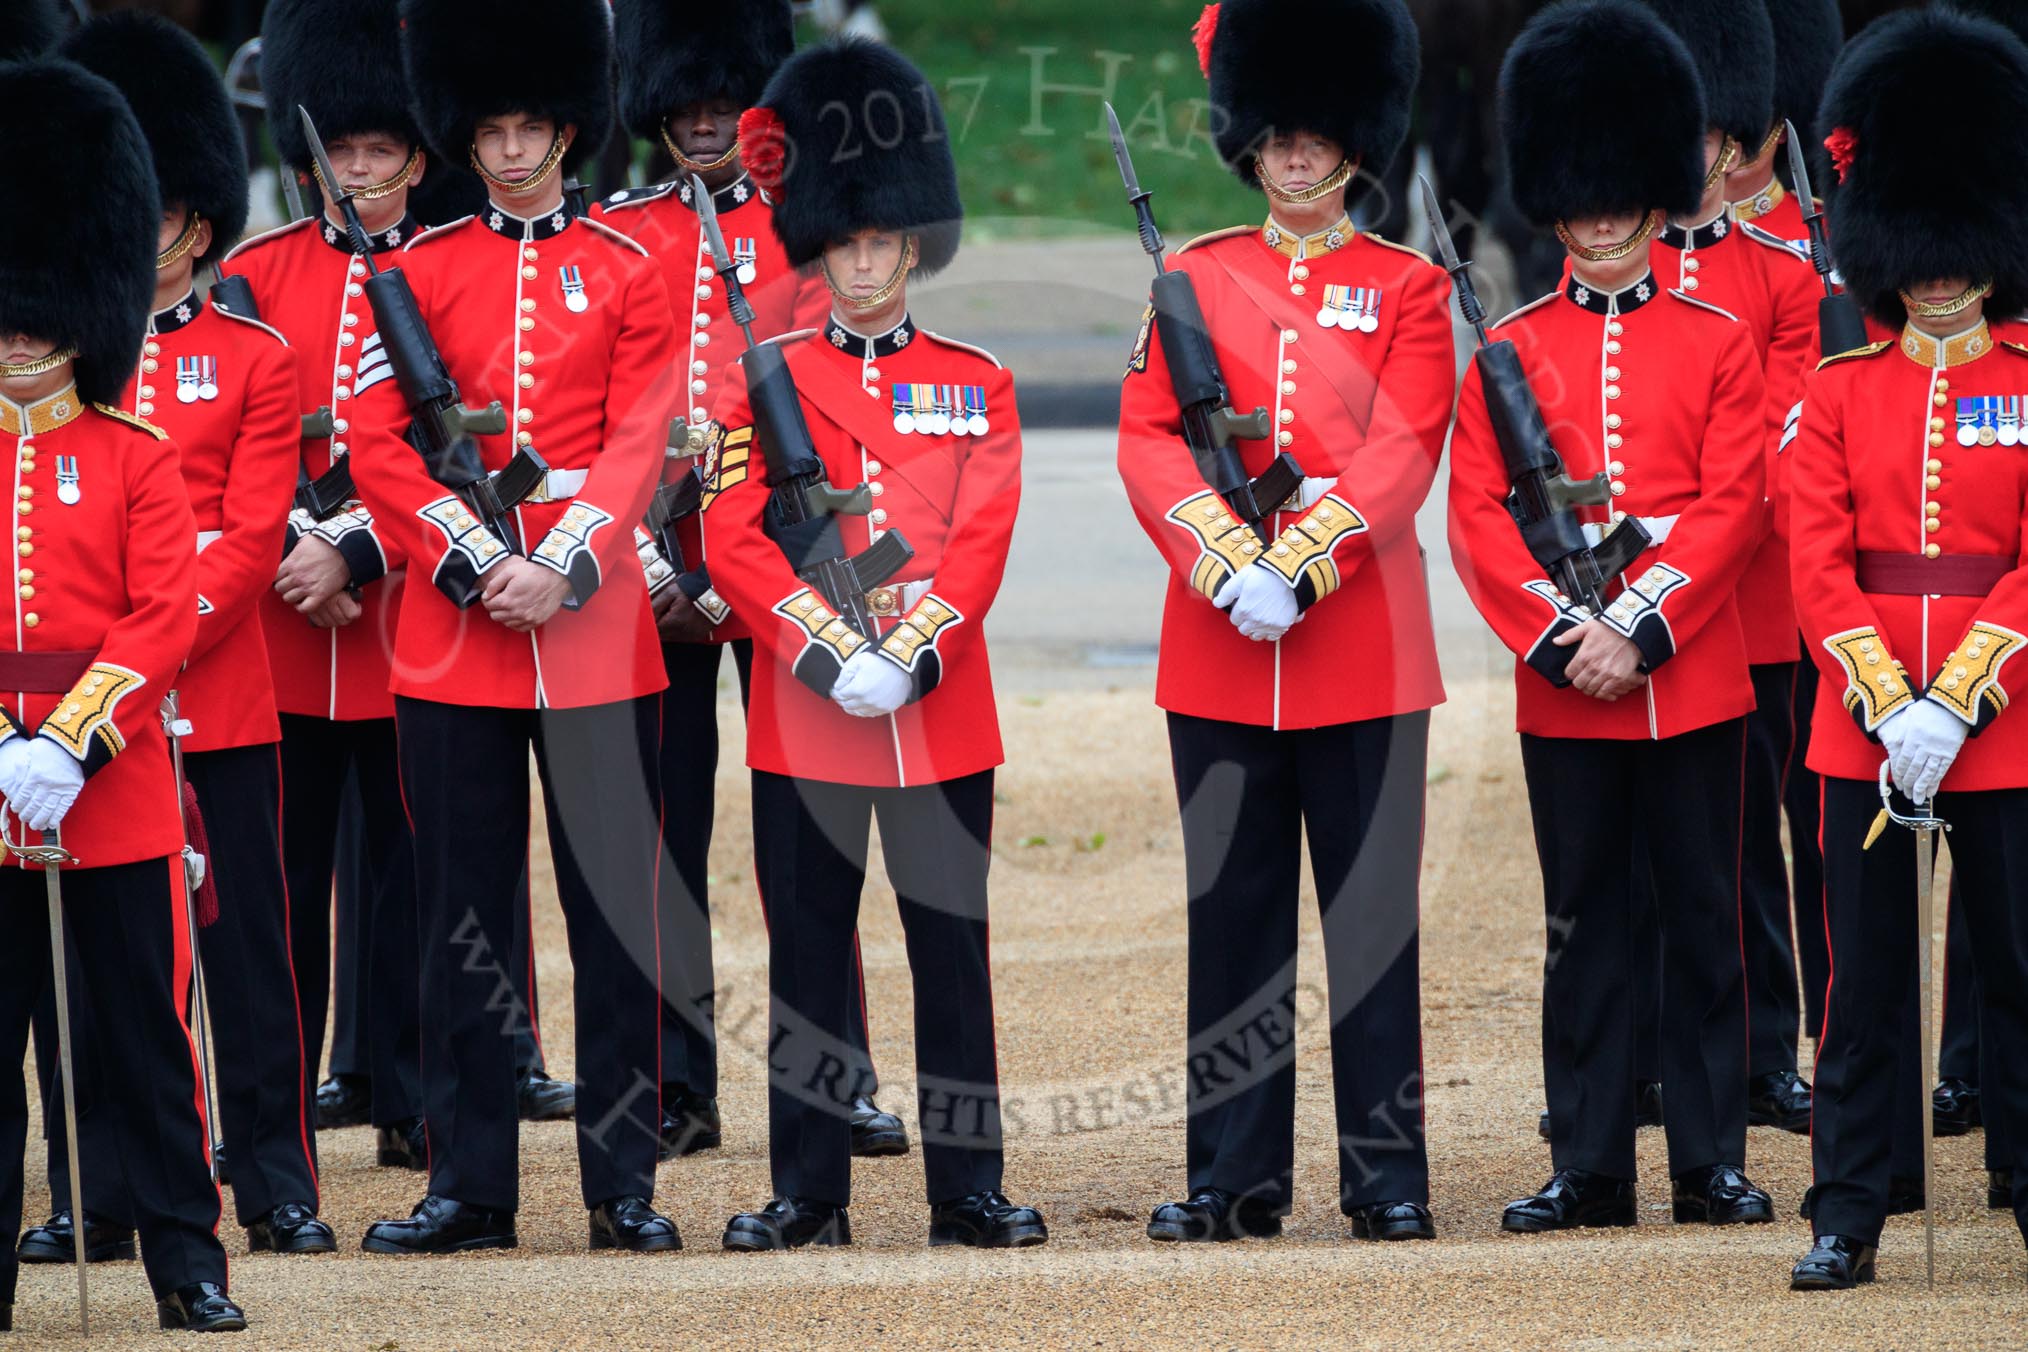 during The Colonel's Review {iptcyear4} (final rehearsal for Trooping the Colour, The Queen's Birthday Parade)  at Horse Guards Parade, Westminster, London, 2 June 2018, 10:48.